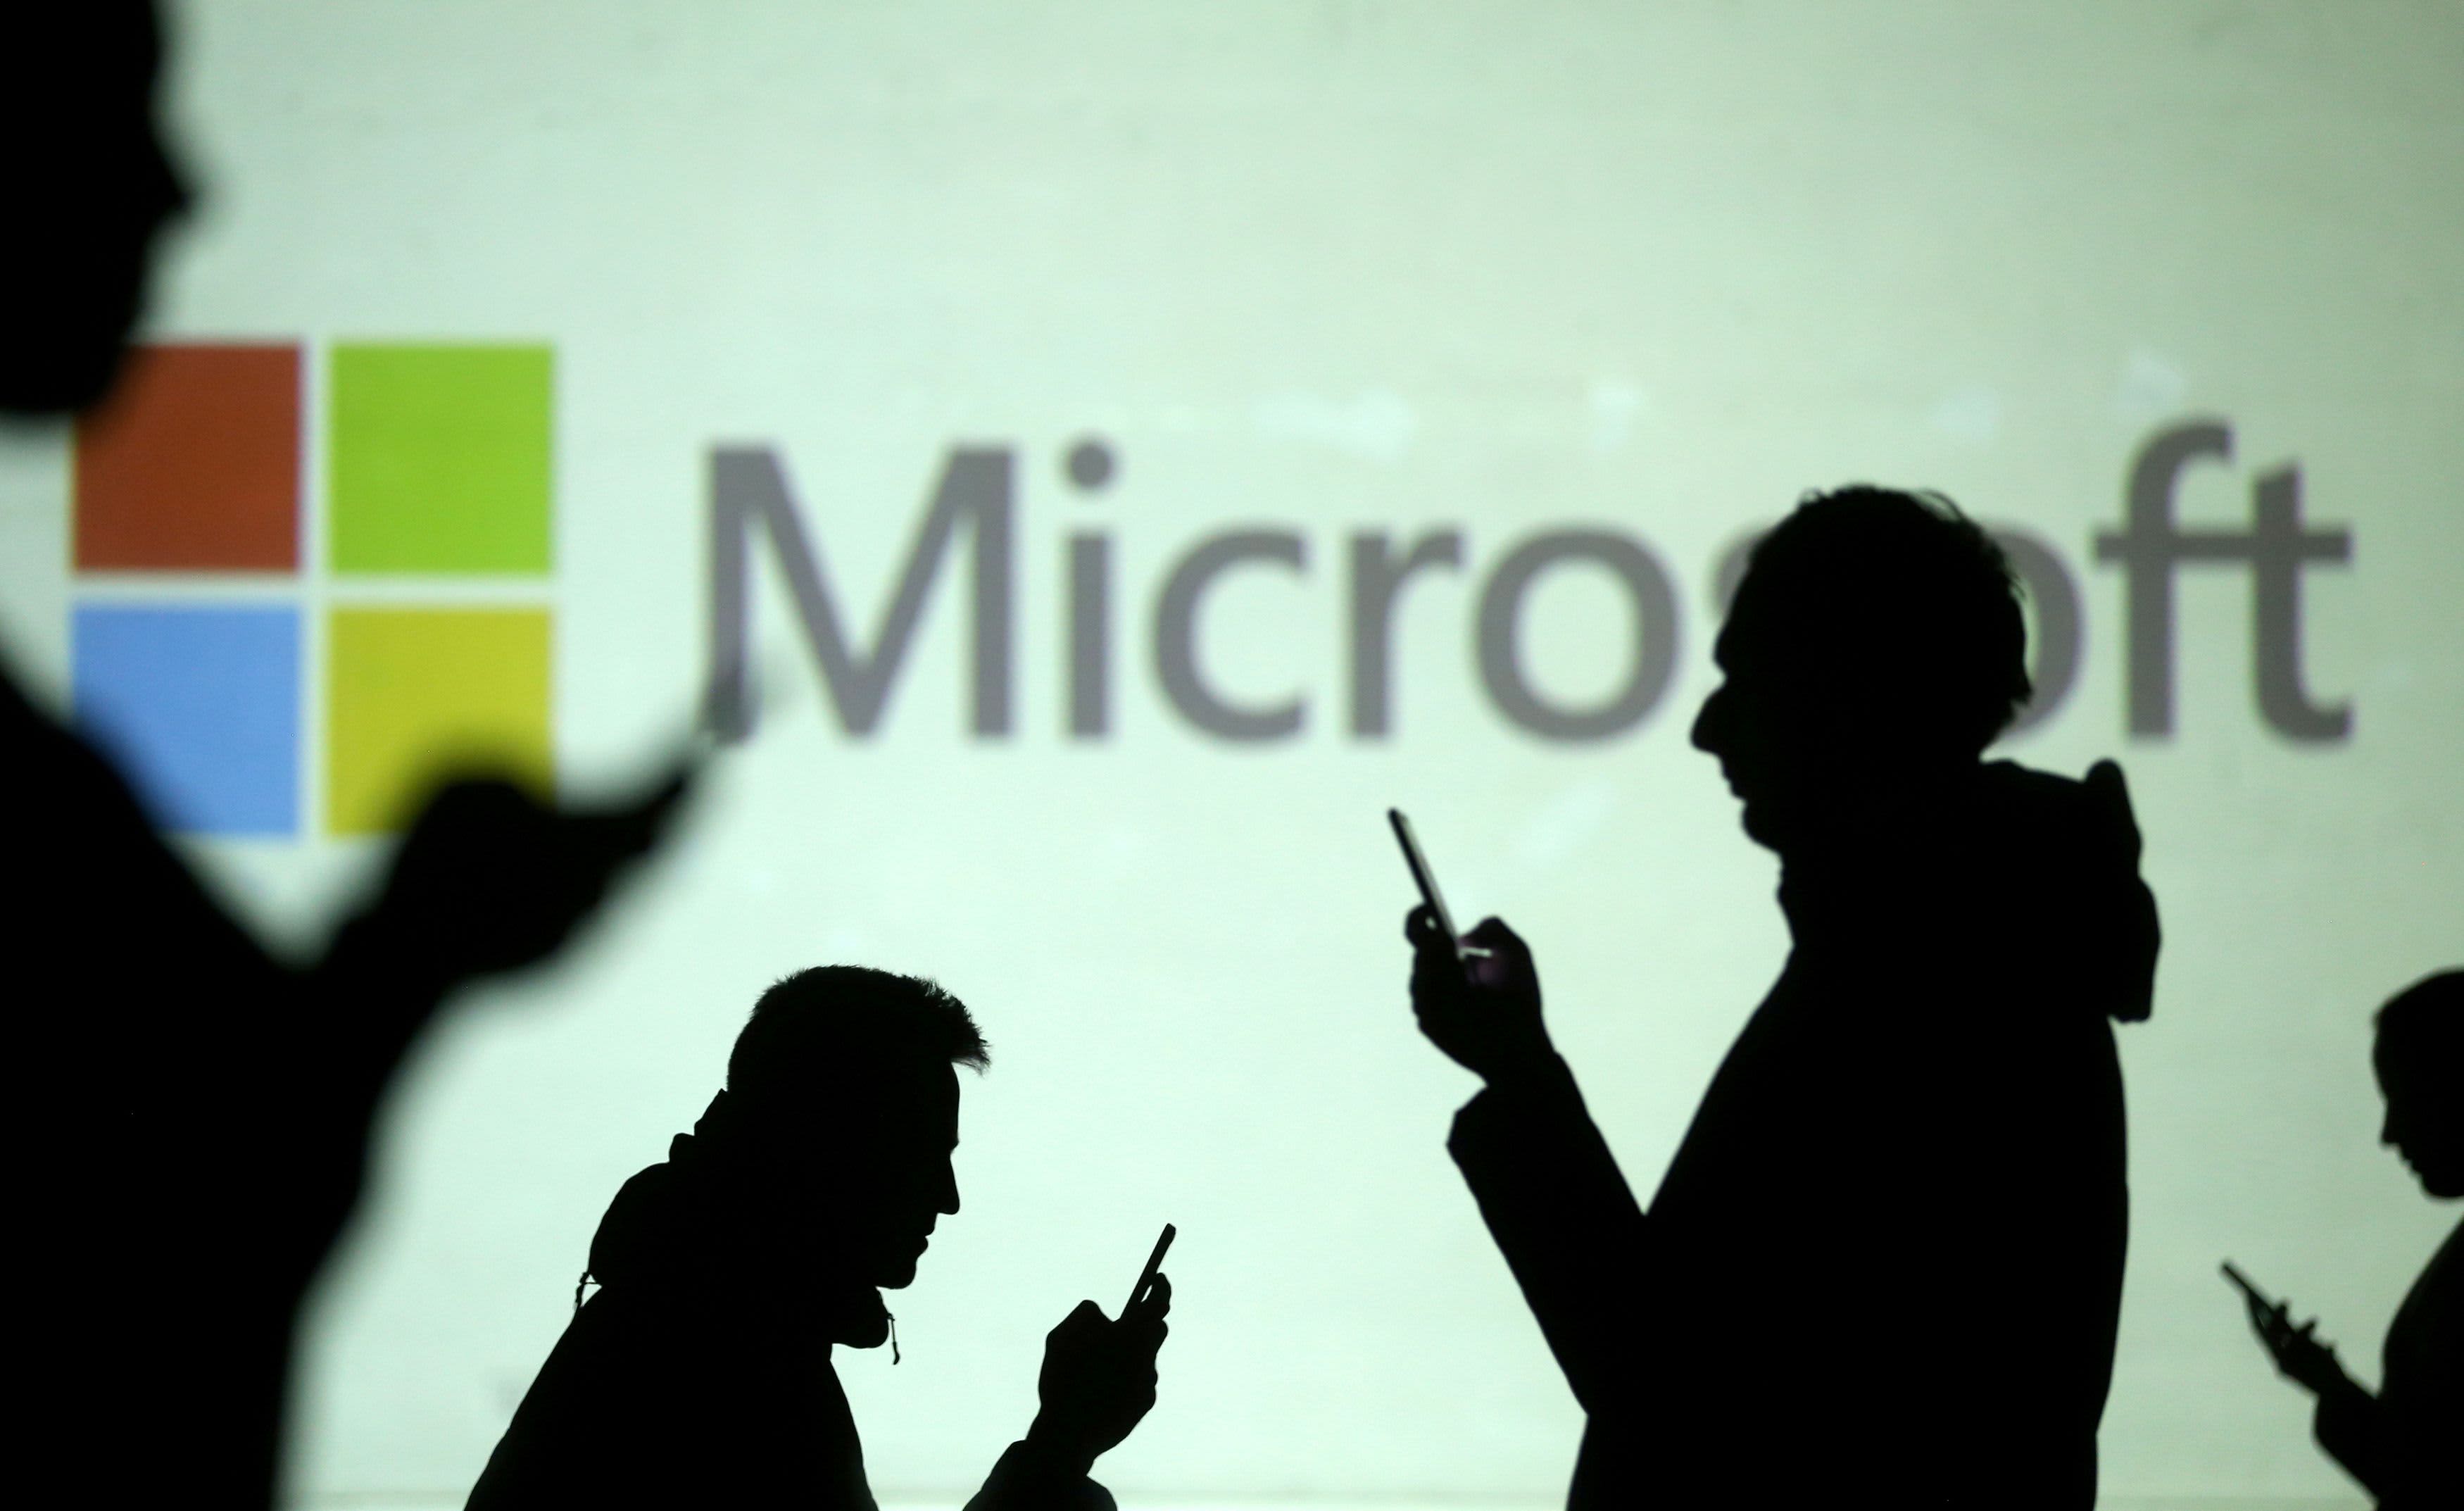 More than 20,000 U.S. organizations compromised due to Microsoft error, says source